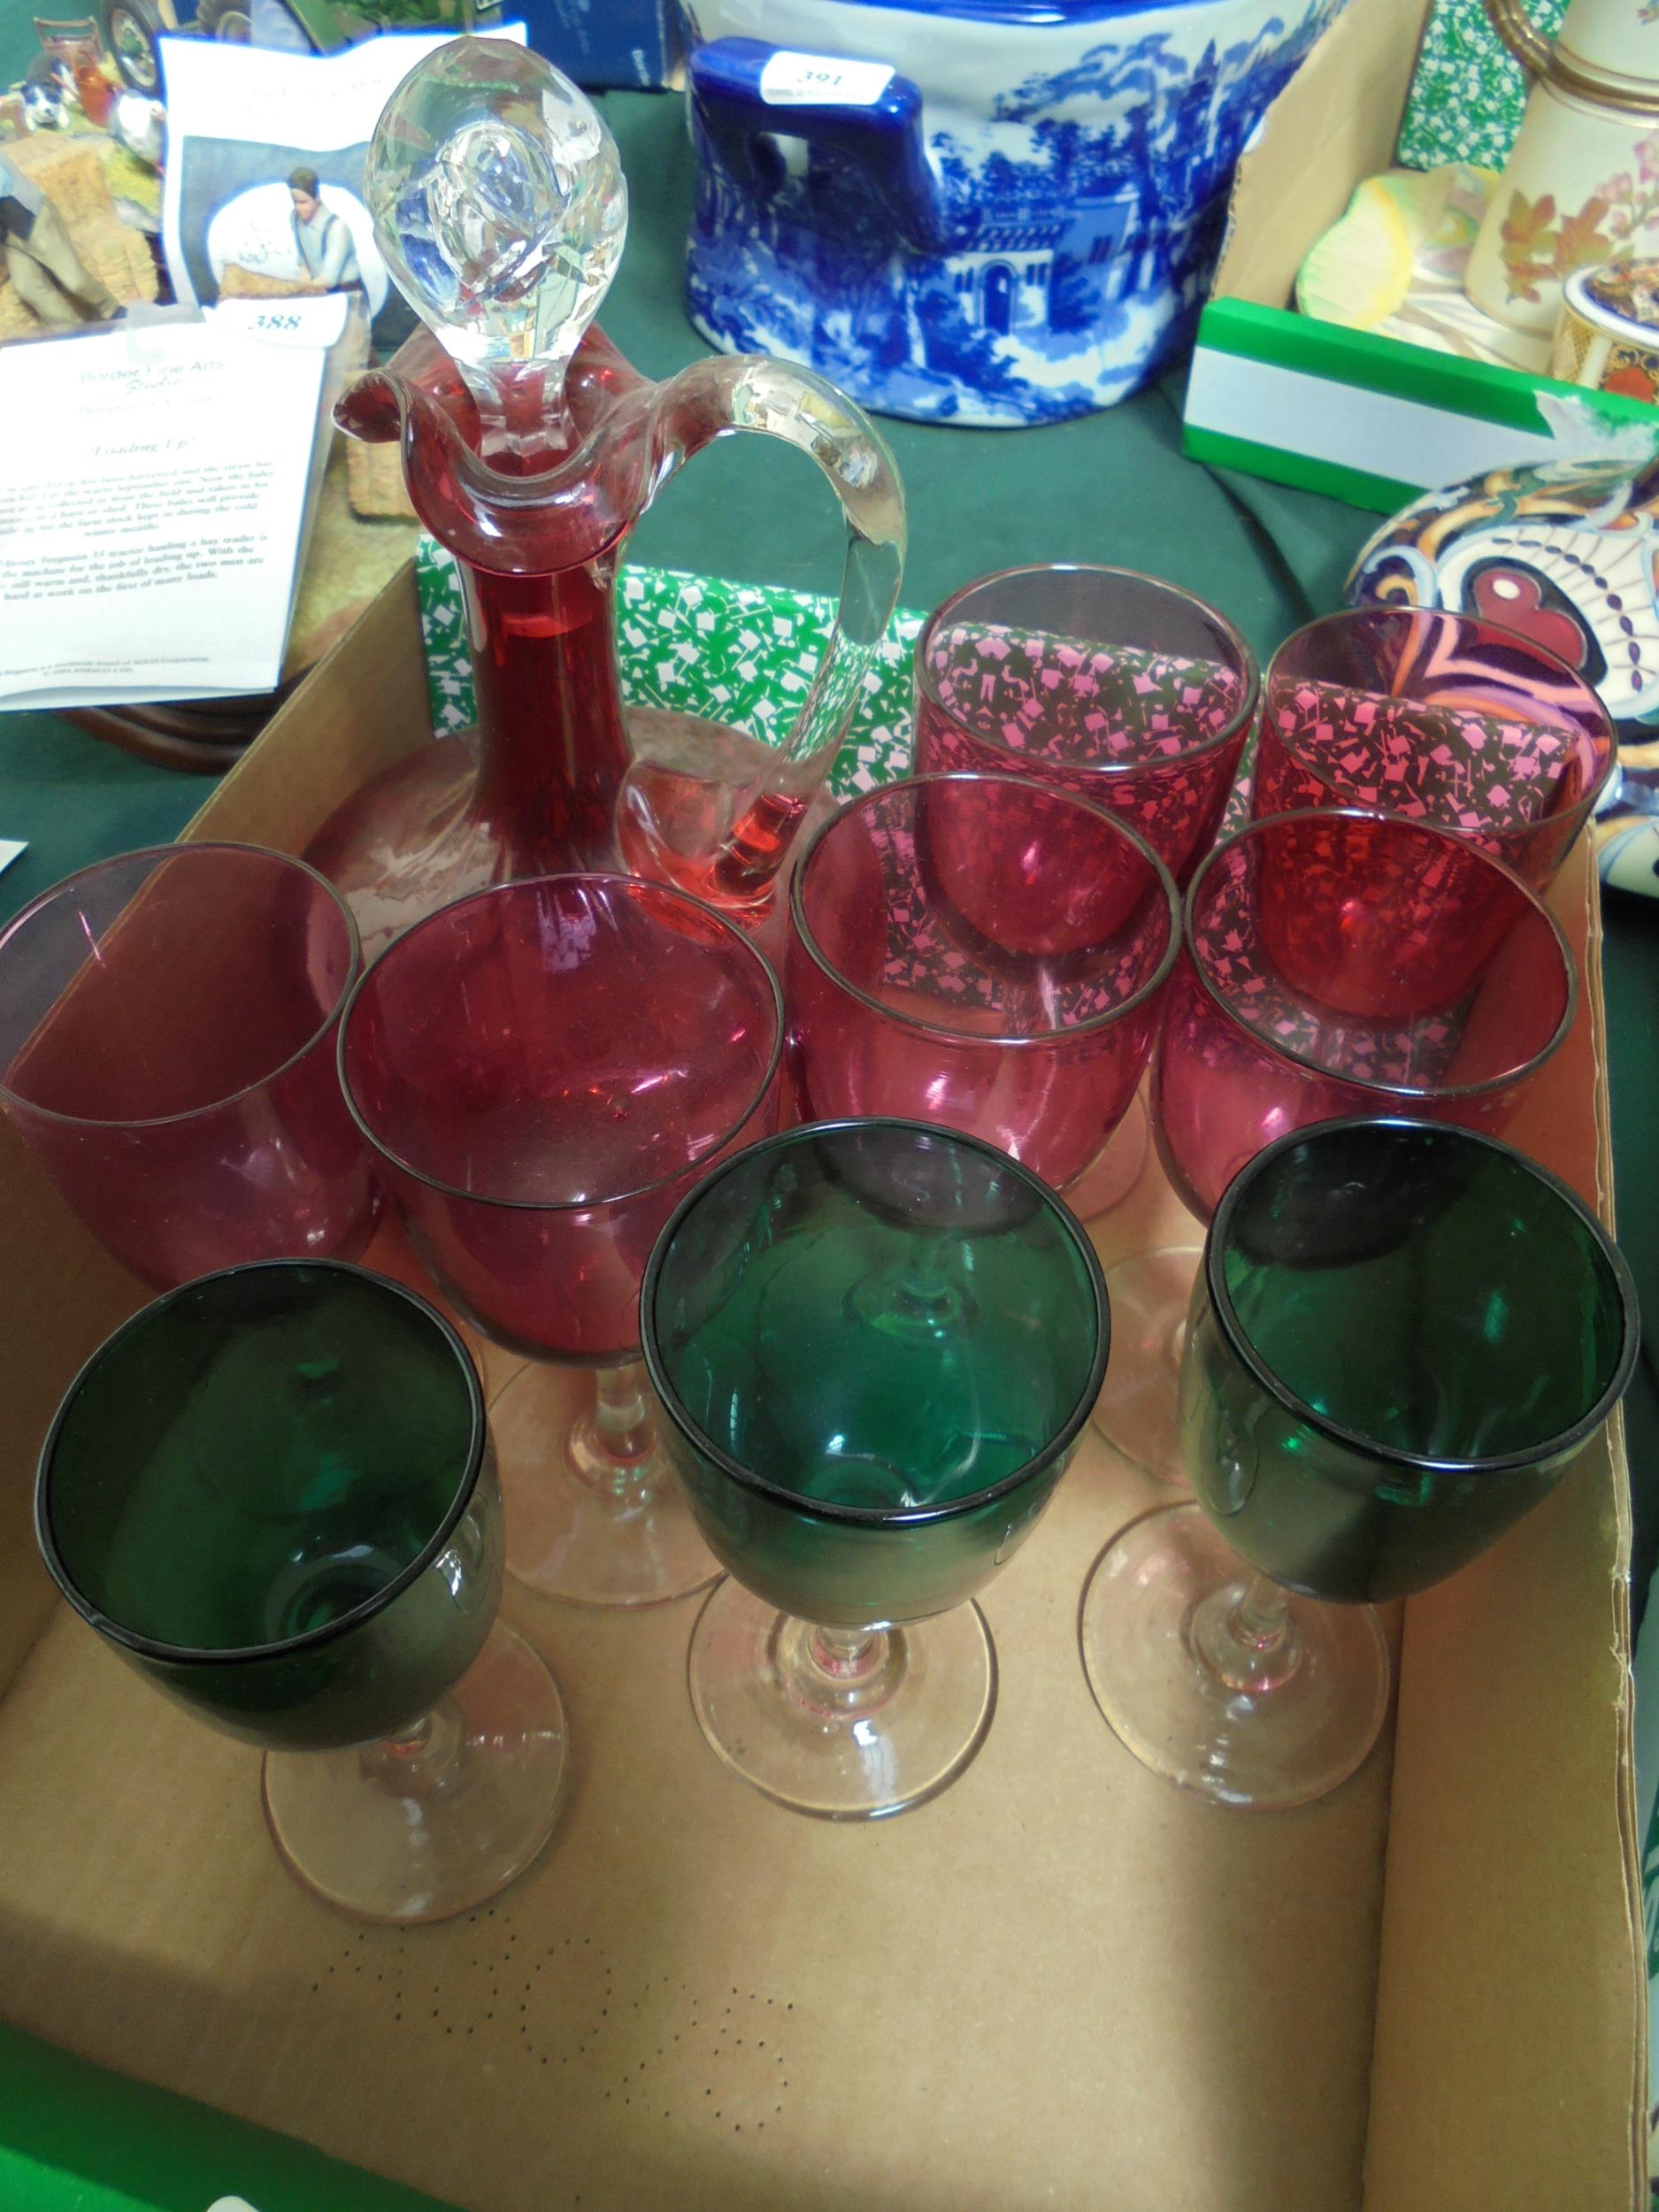 Cut glass cranberry decanter with 6 ruby glasses together with 3 green cranberry style glasses